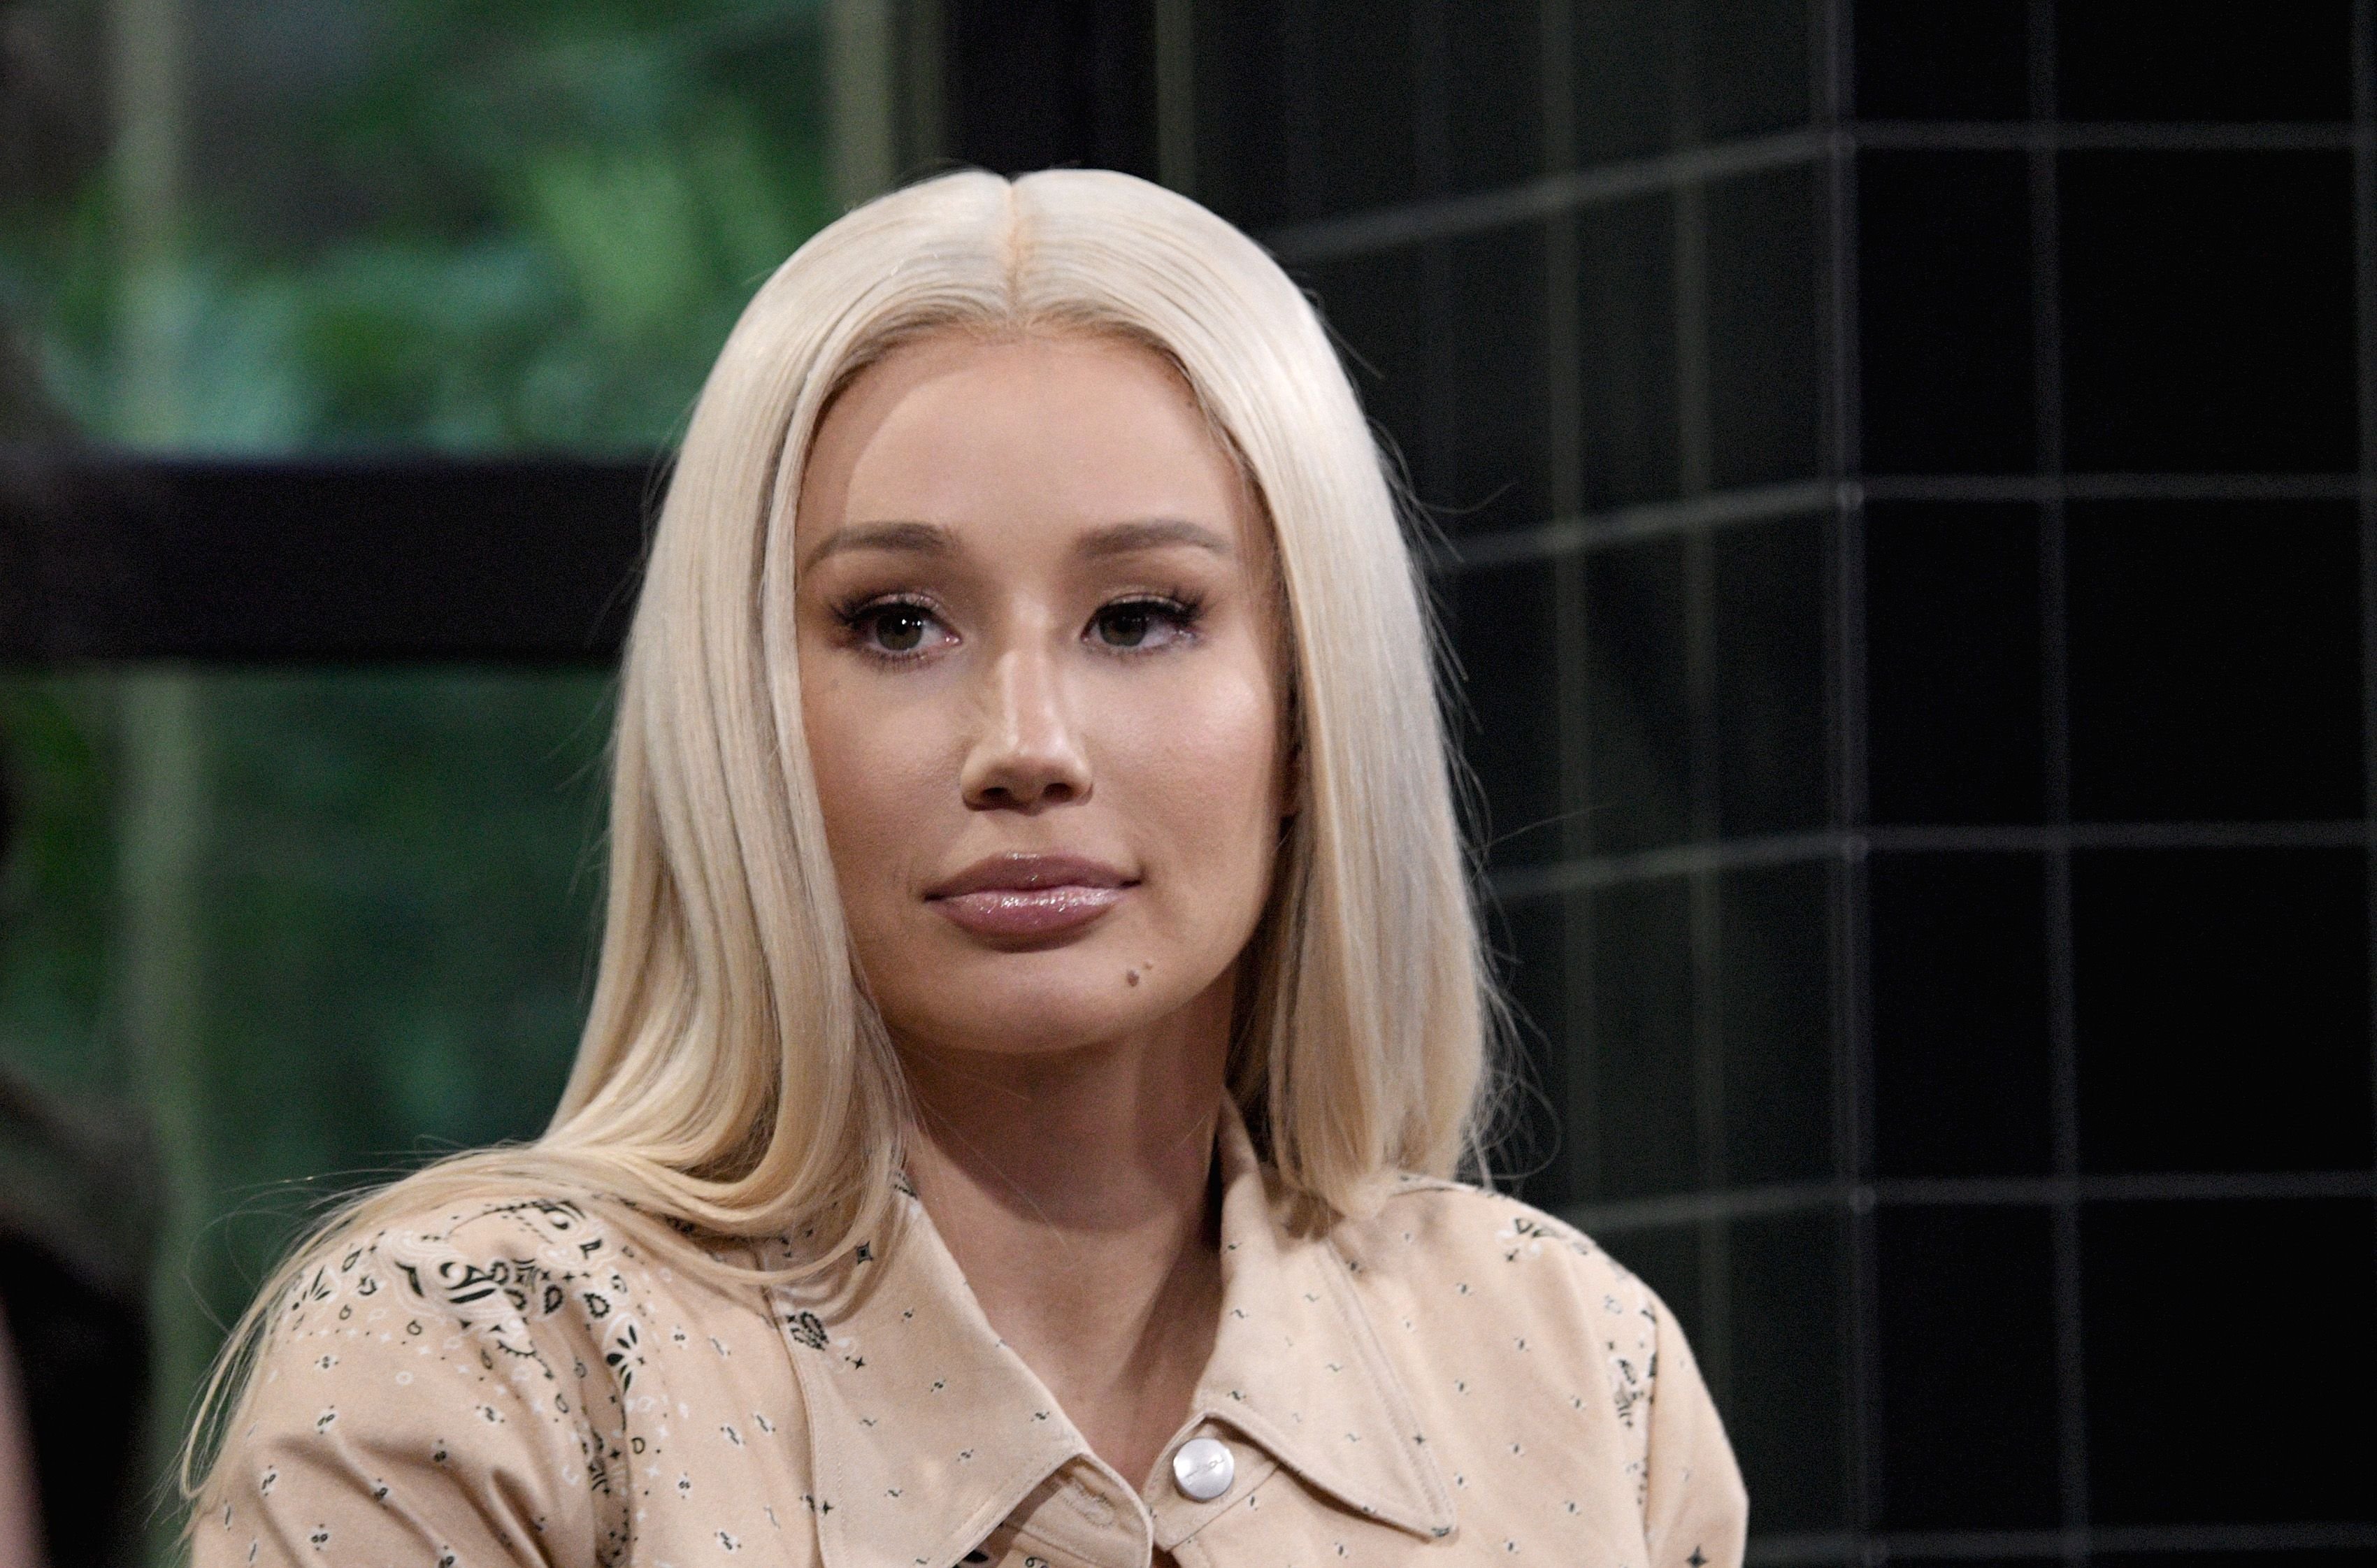 Rapper and songwriter Iggy Azalea at 'The X Change Rate' hosted by Monet X Change during the Build Series at Build Studio on July 25, 2019 | Photo: Getty Images